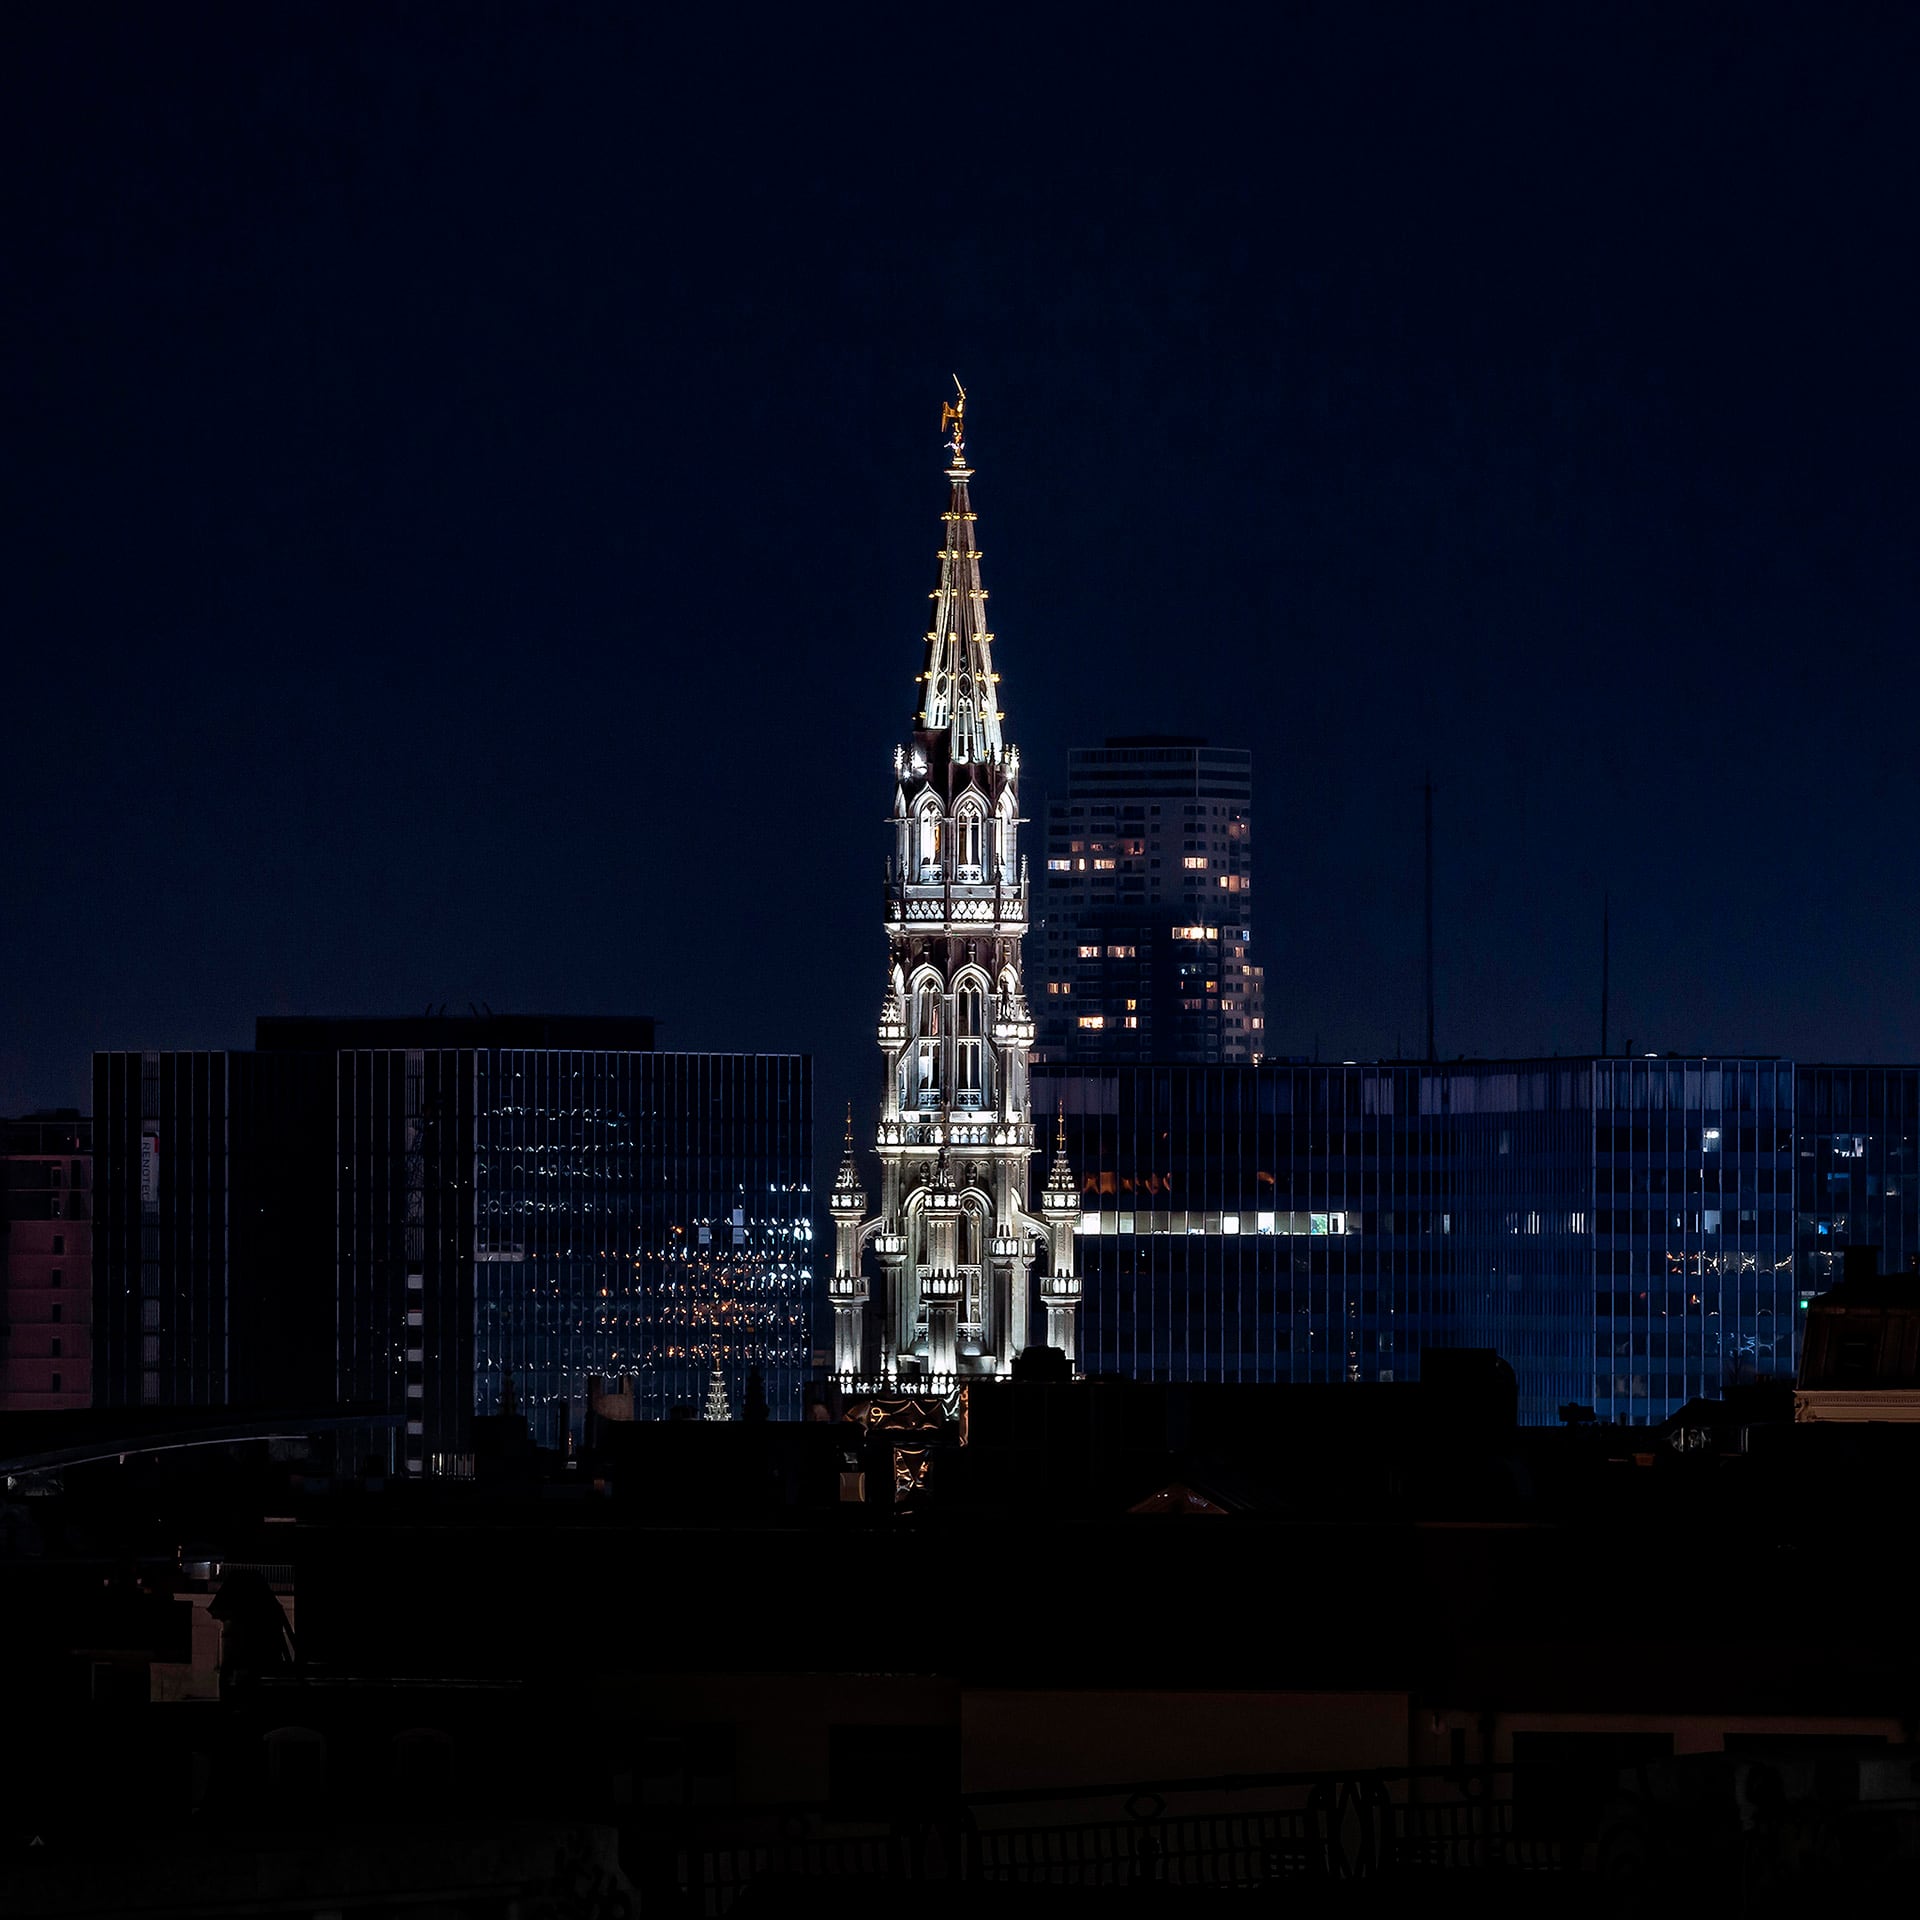 Gothic Night by Christophe Vogels in Brussels, Belgium